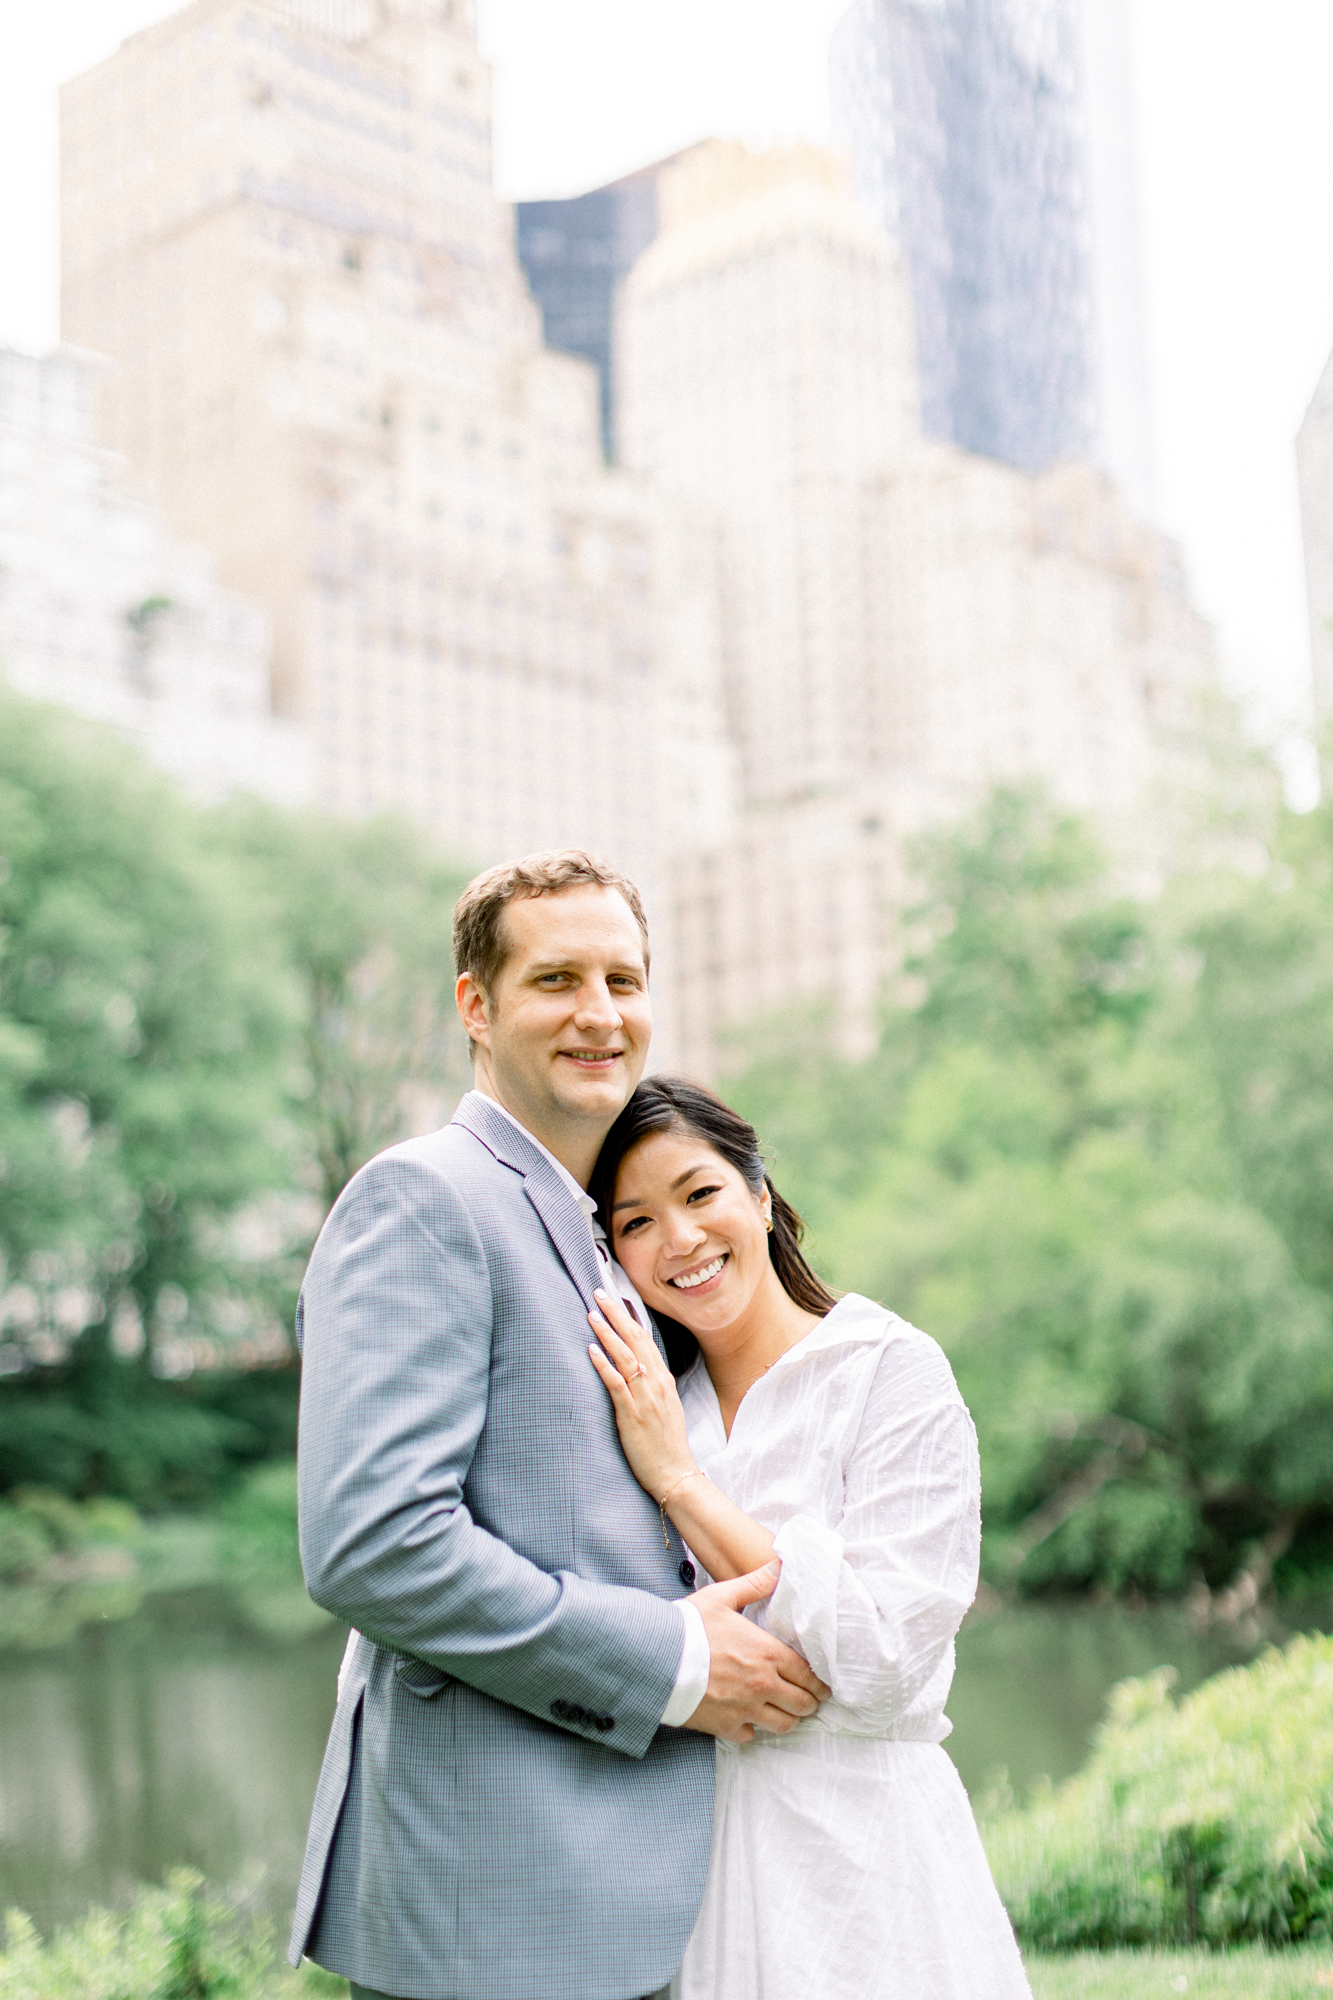 Beautiful Central Park Rowboat Engagement Photography in New York